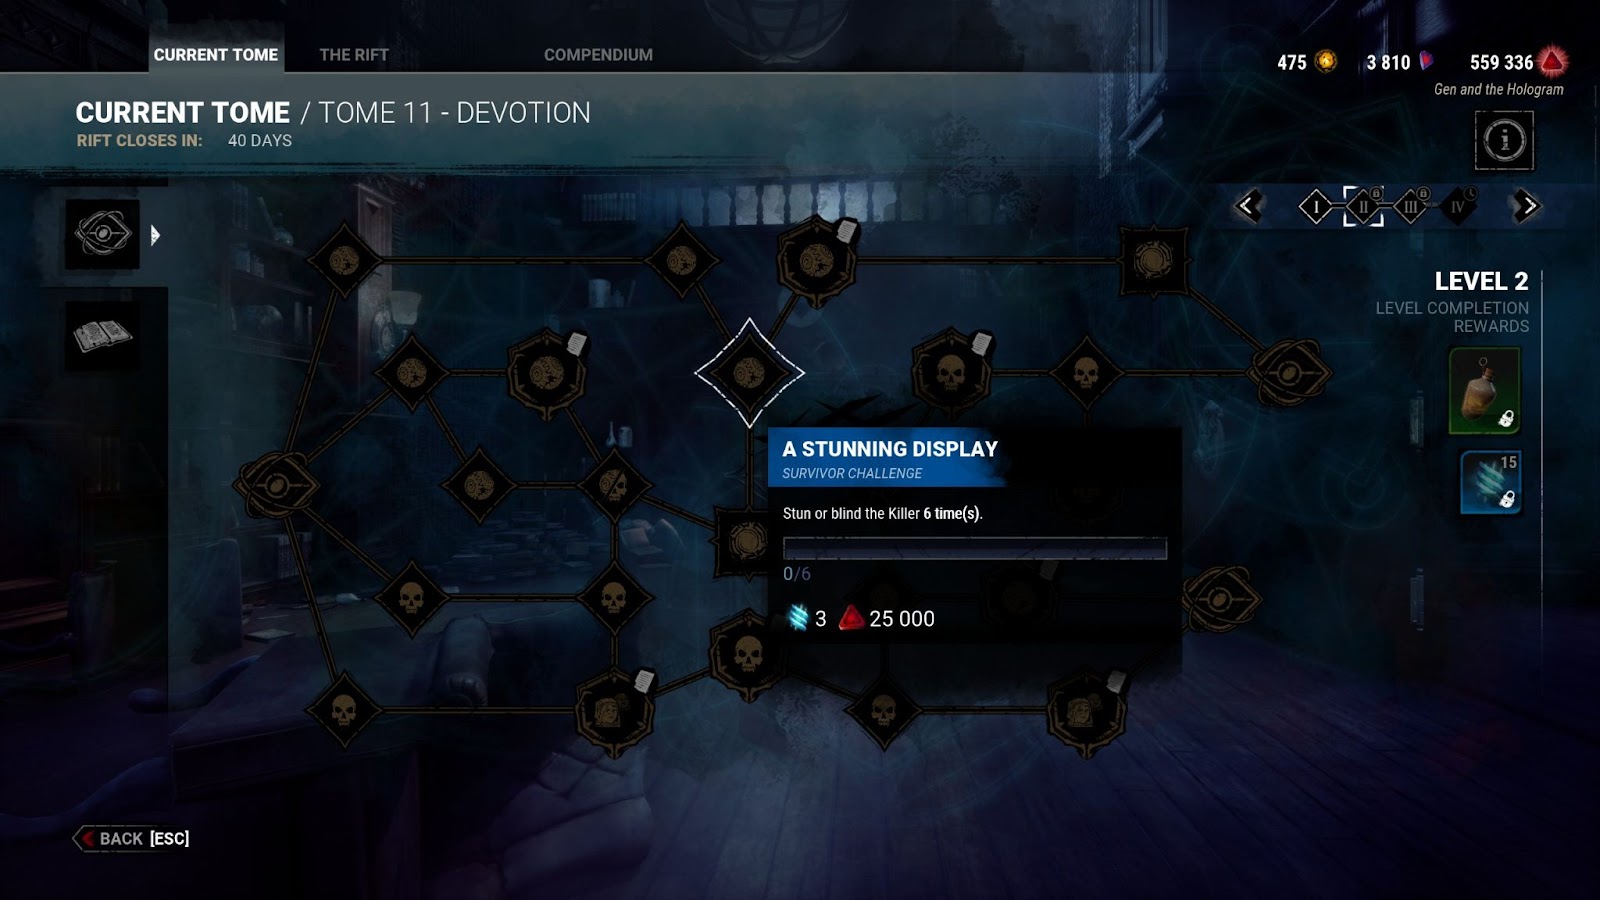 The Archives screen from Dead by Daylight is shown. Pictured is a popup for an objective with a progress meter and notes on rewards for completing the mission.